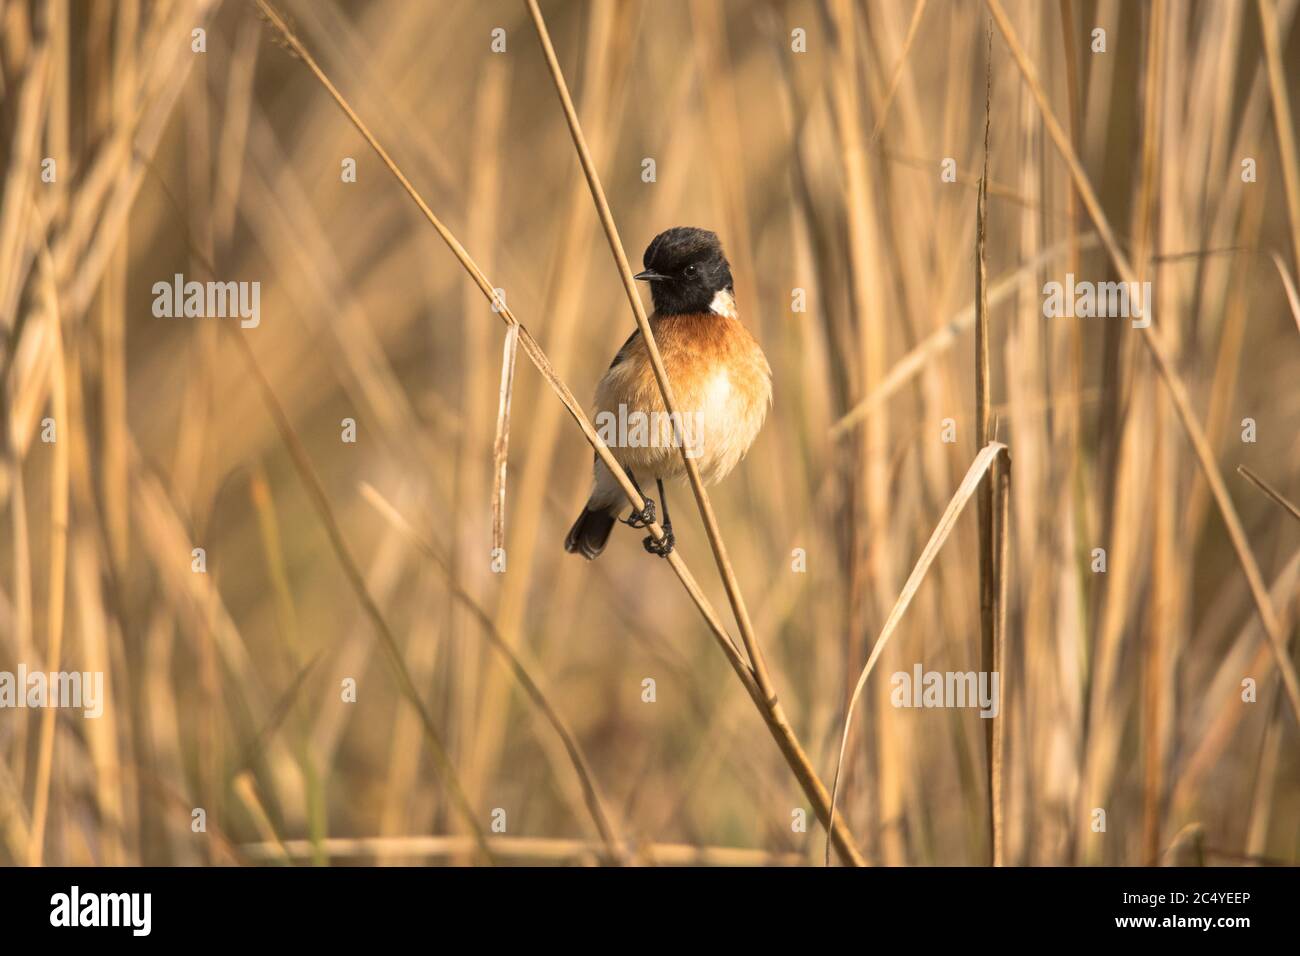 Siberian Stonechat, a migratory bird on grass straws in the grasslands at a national park Stock Photo